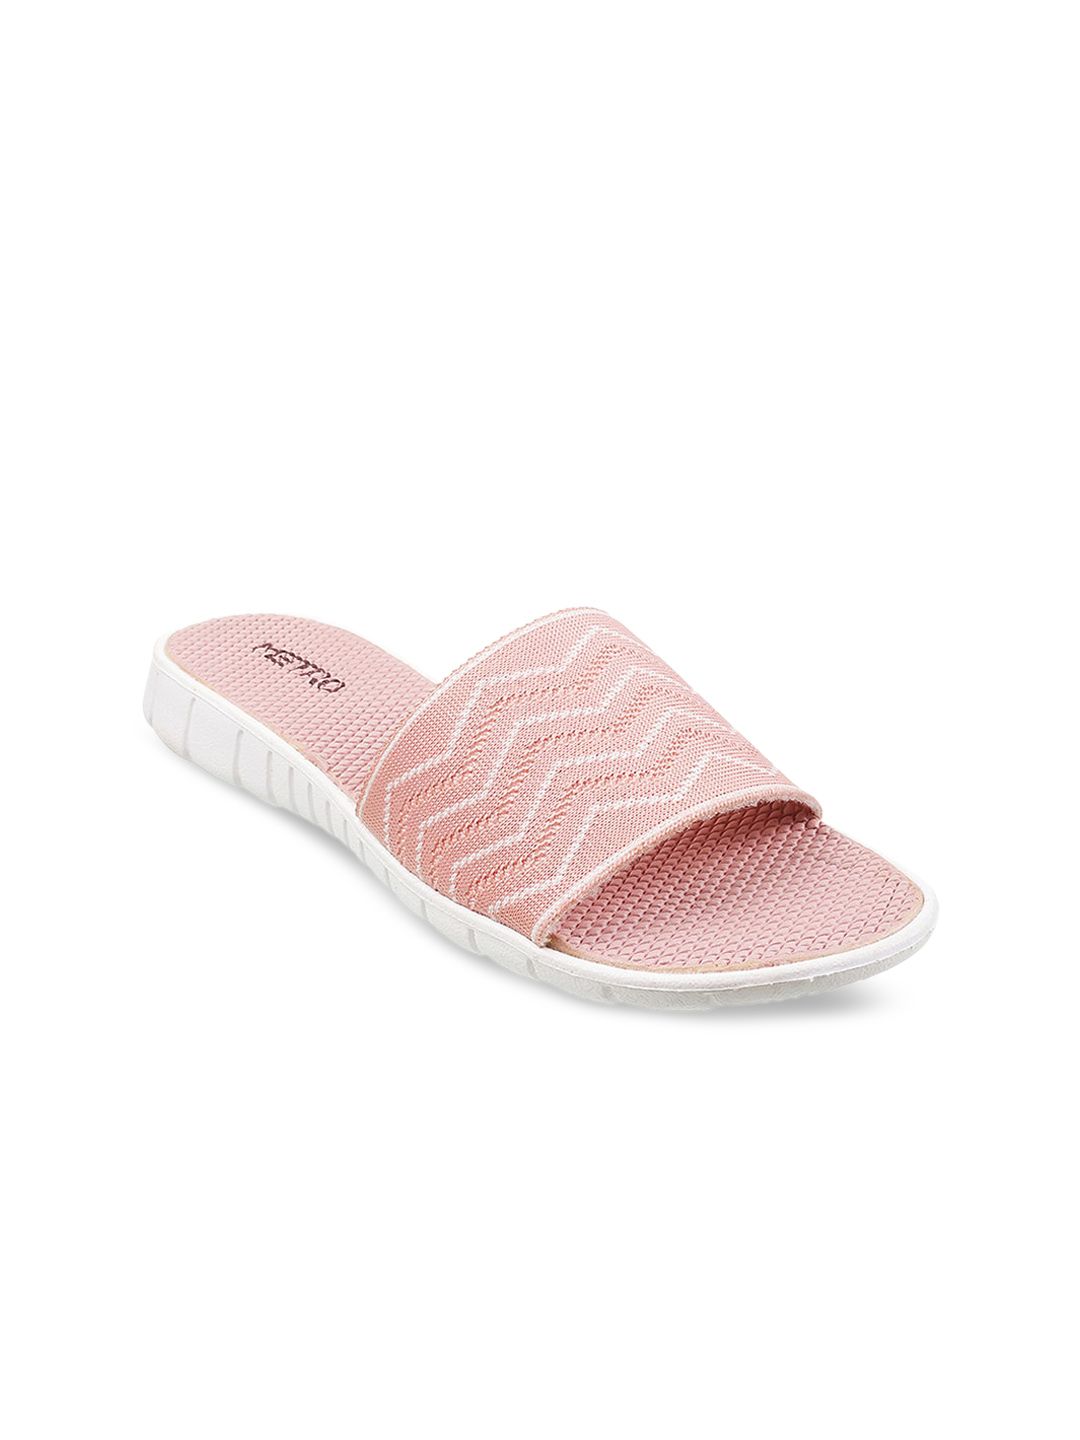 Metro Women Pink Textured Open Toe Flats with Laser Cuts Price in India